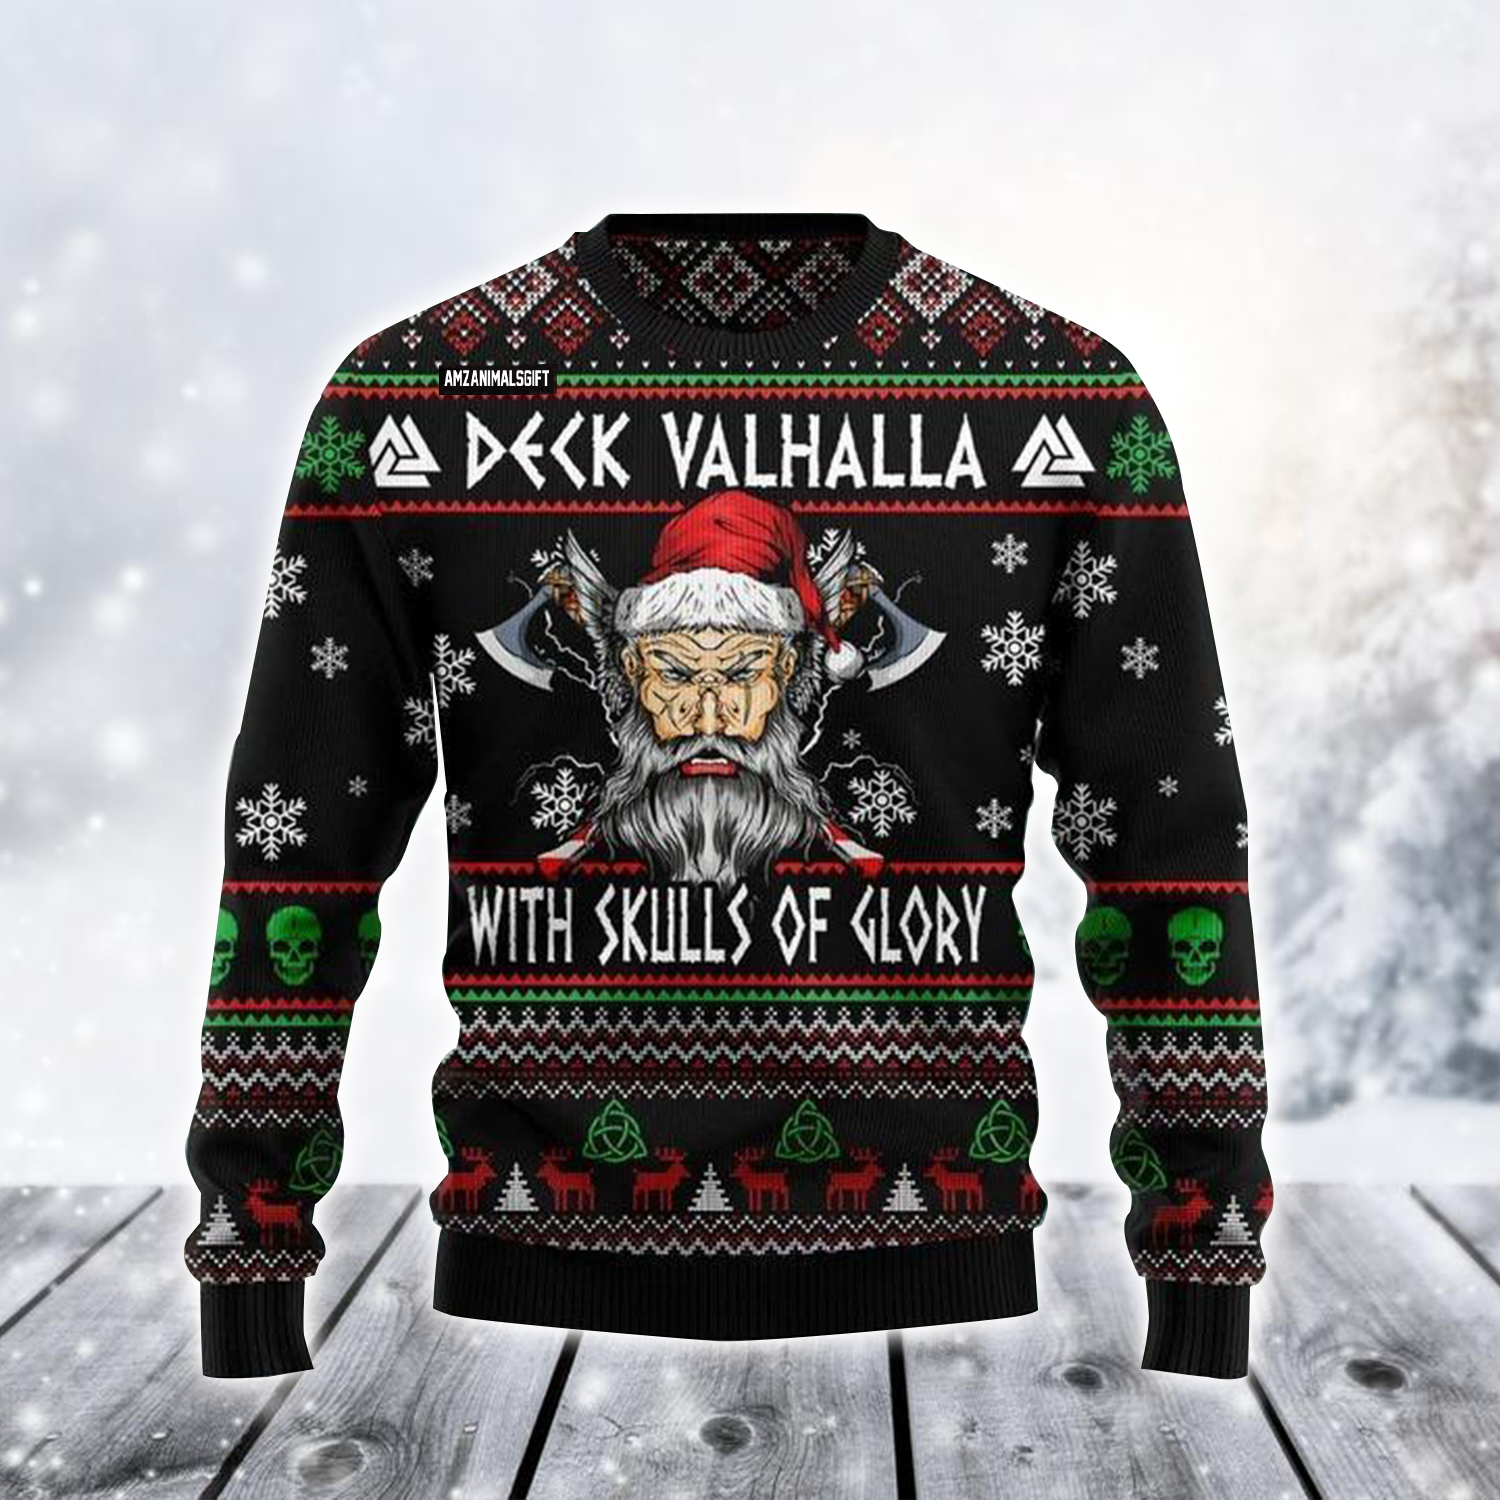 Viking Ugly Sweater, Viking Deck Vahalla With Skulls Of Glory Ugly Sweater For Men & Women, Perfect Gift For Christmas, Friends, Family